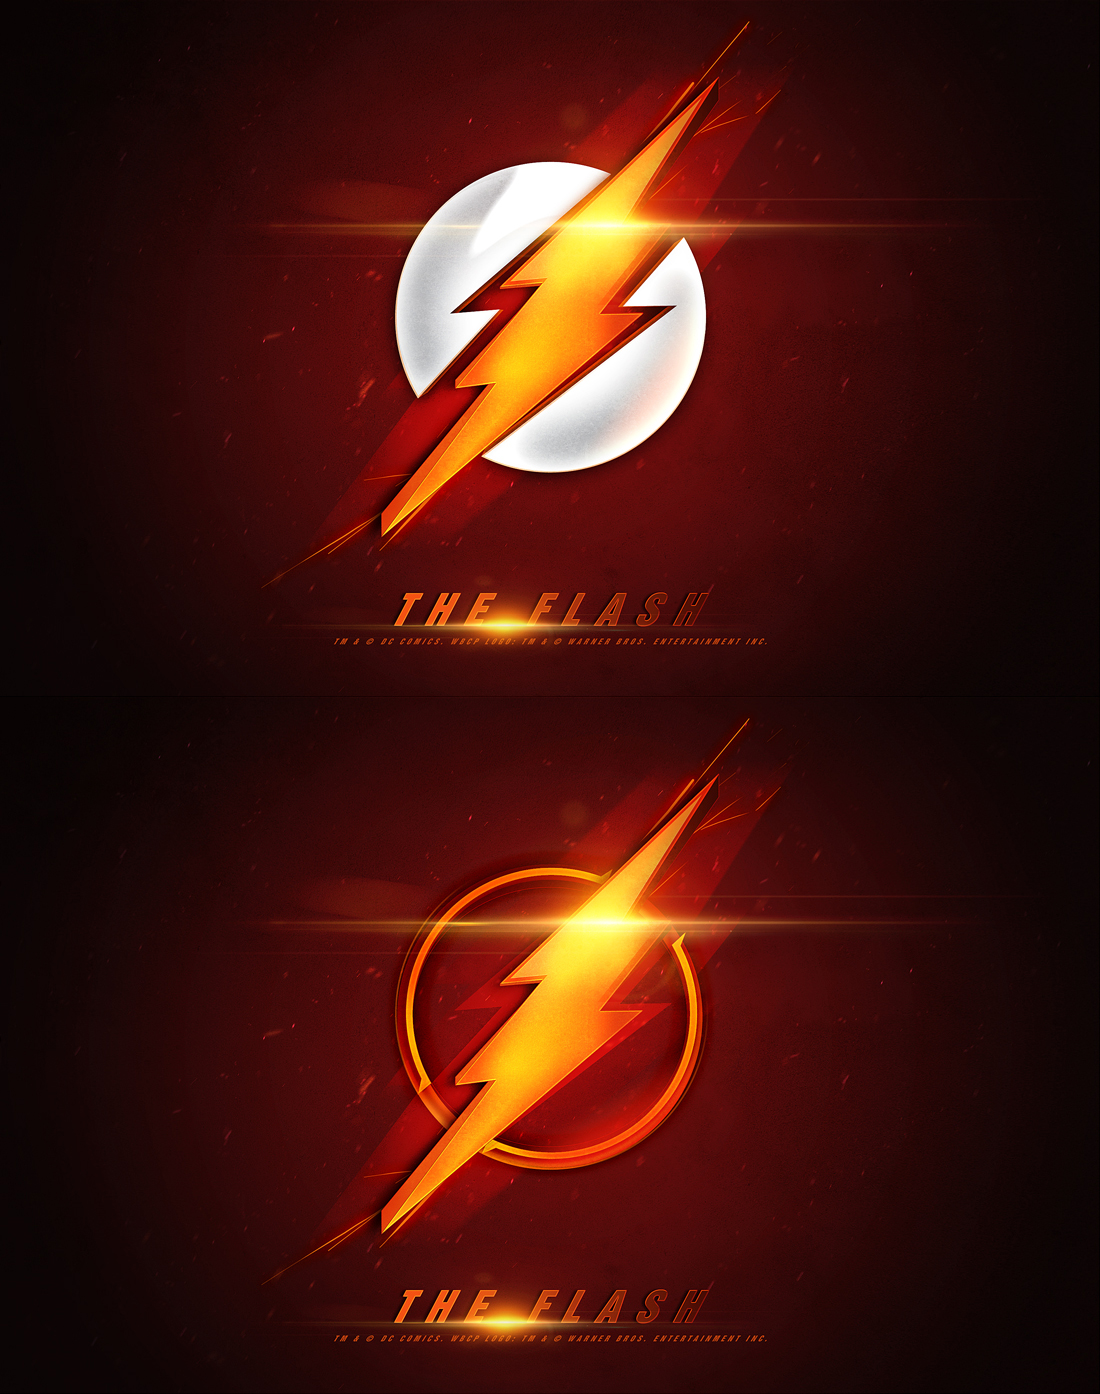 The Flash Logo   Movie Poster by oroster on